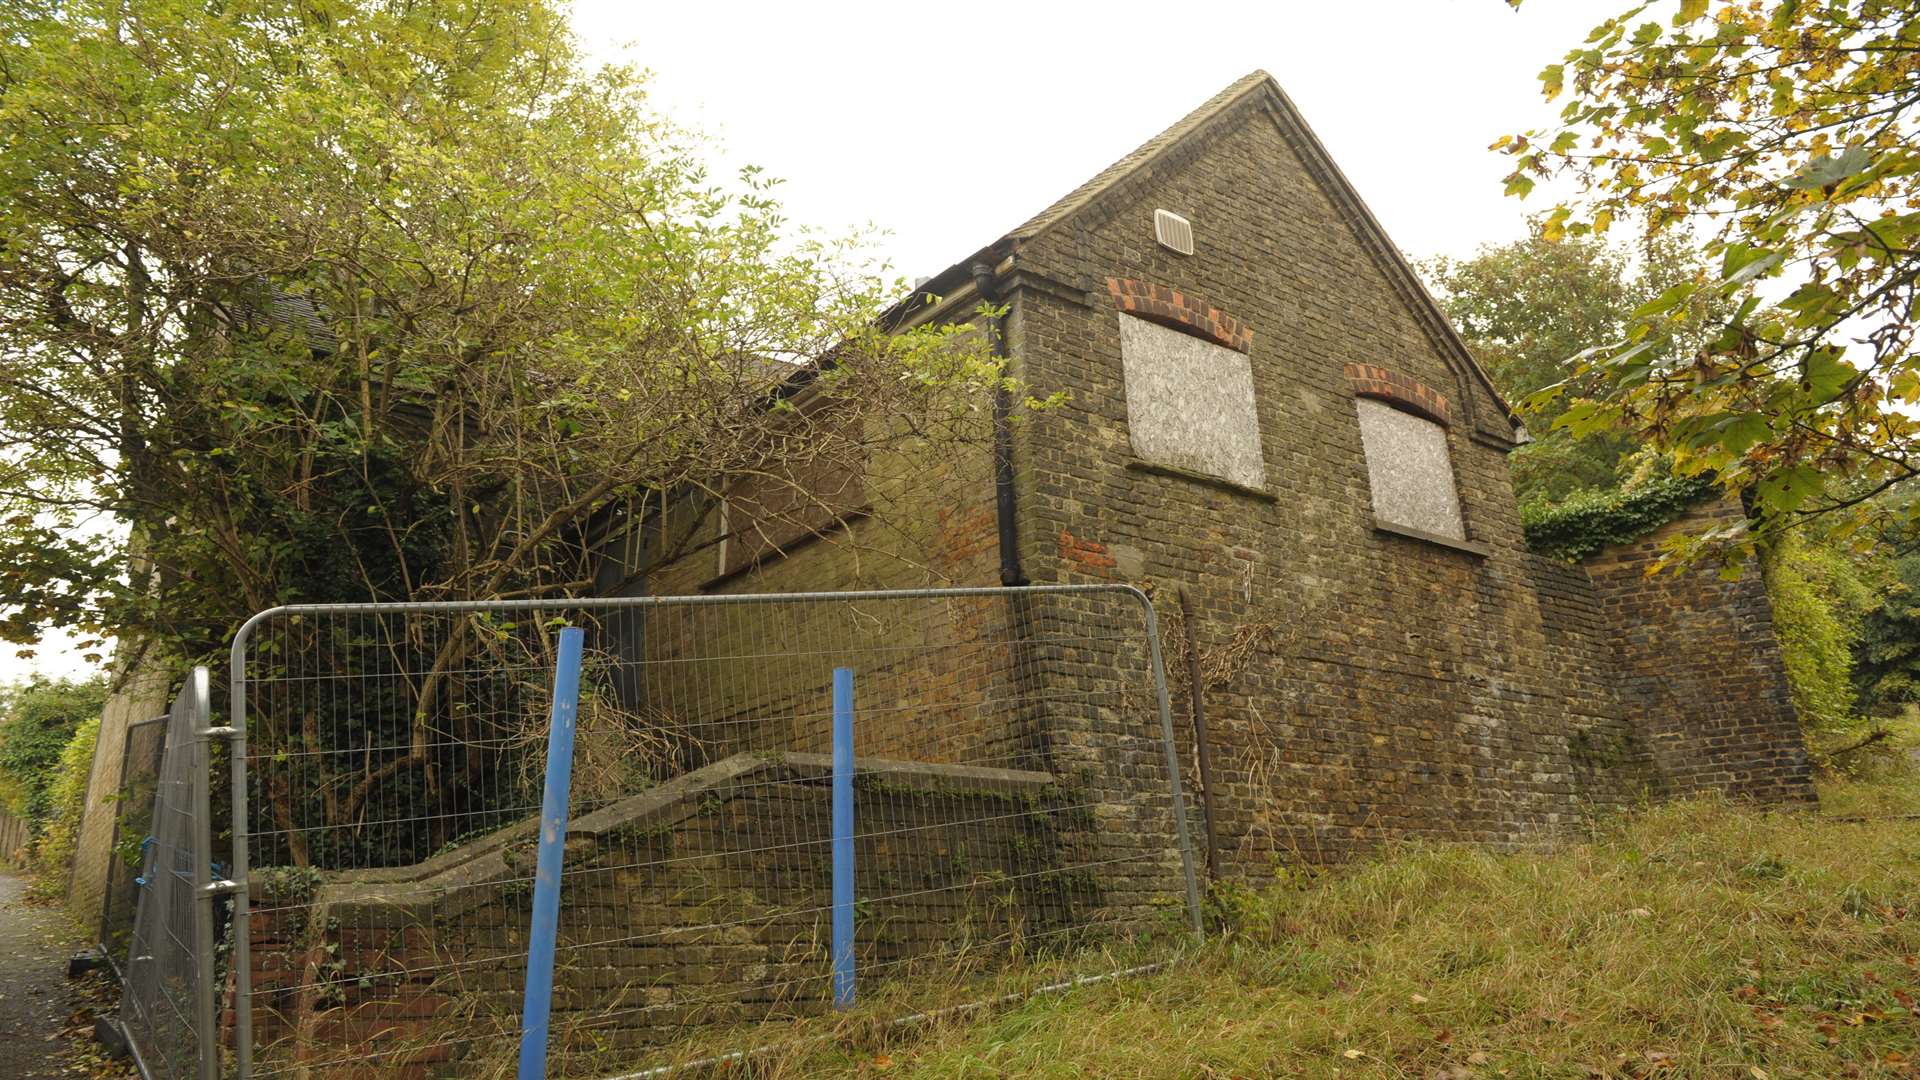 Former St Matthew's Primary School in Borstal. Image from before the fire. Picture: Steve Crispe